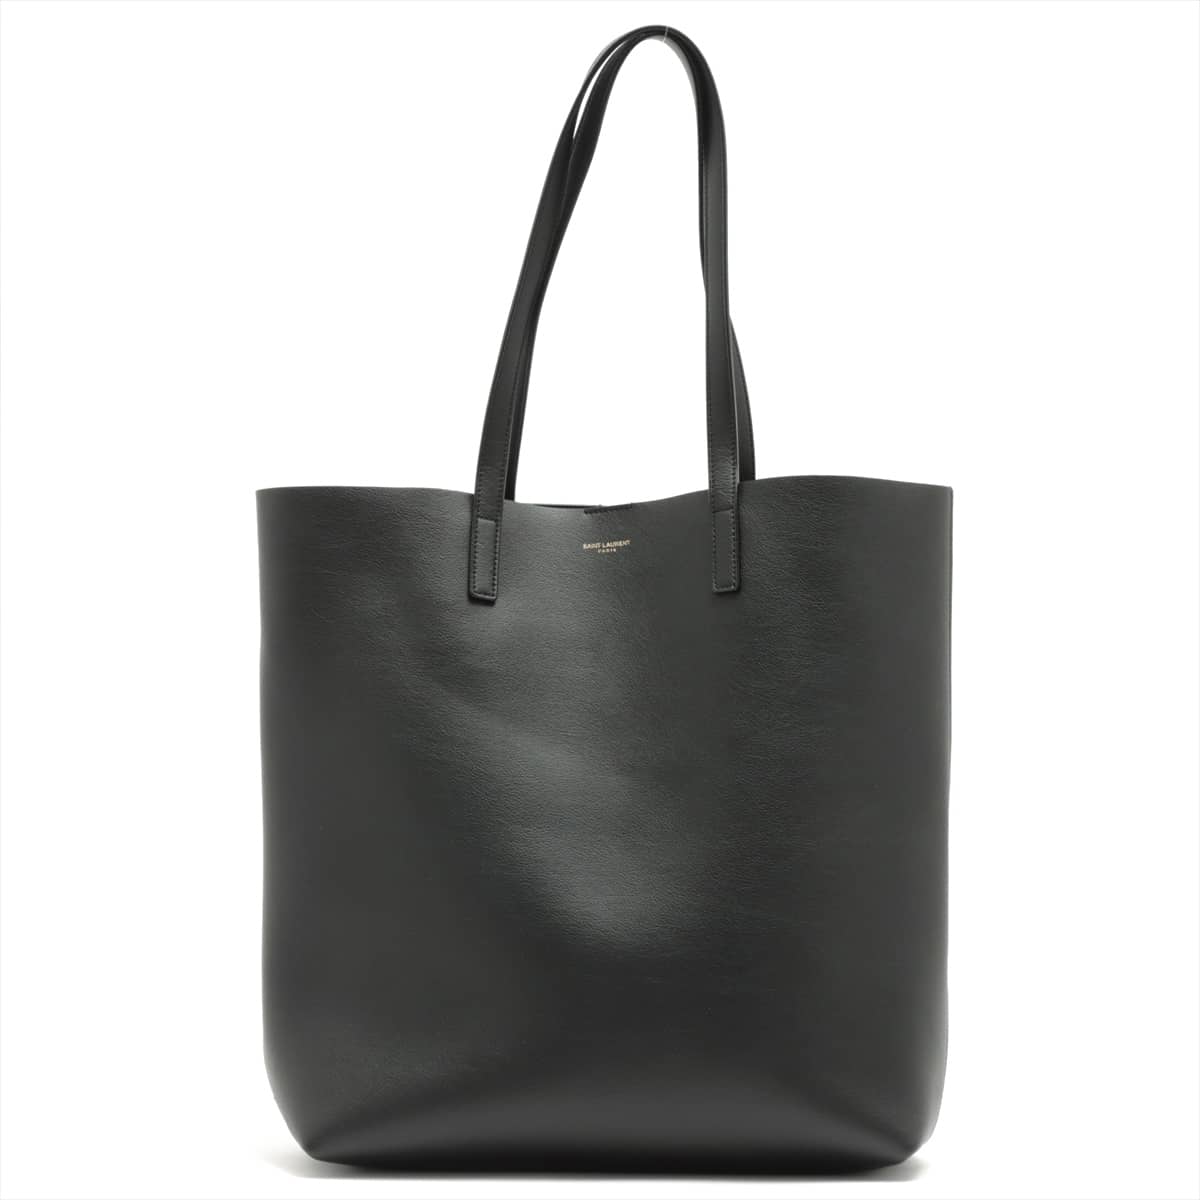 Saint Laurent Paris North South Sac Shopping Leather Tote bag Black 600306 with pouch